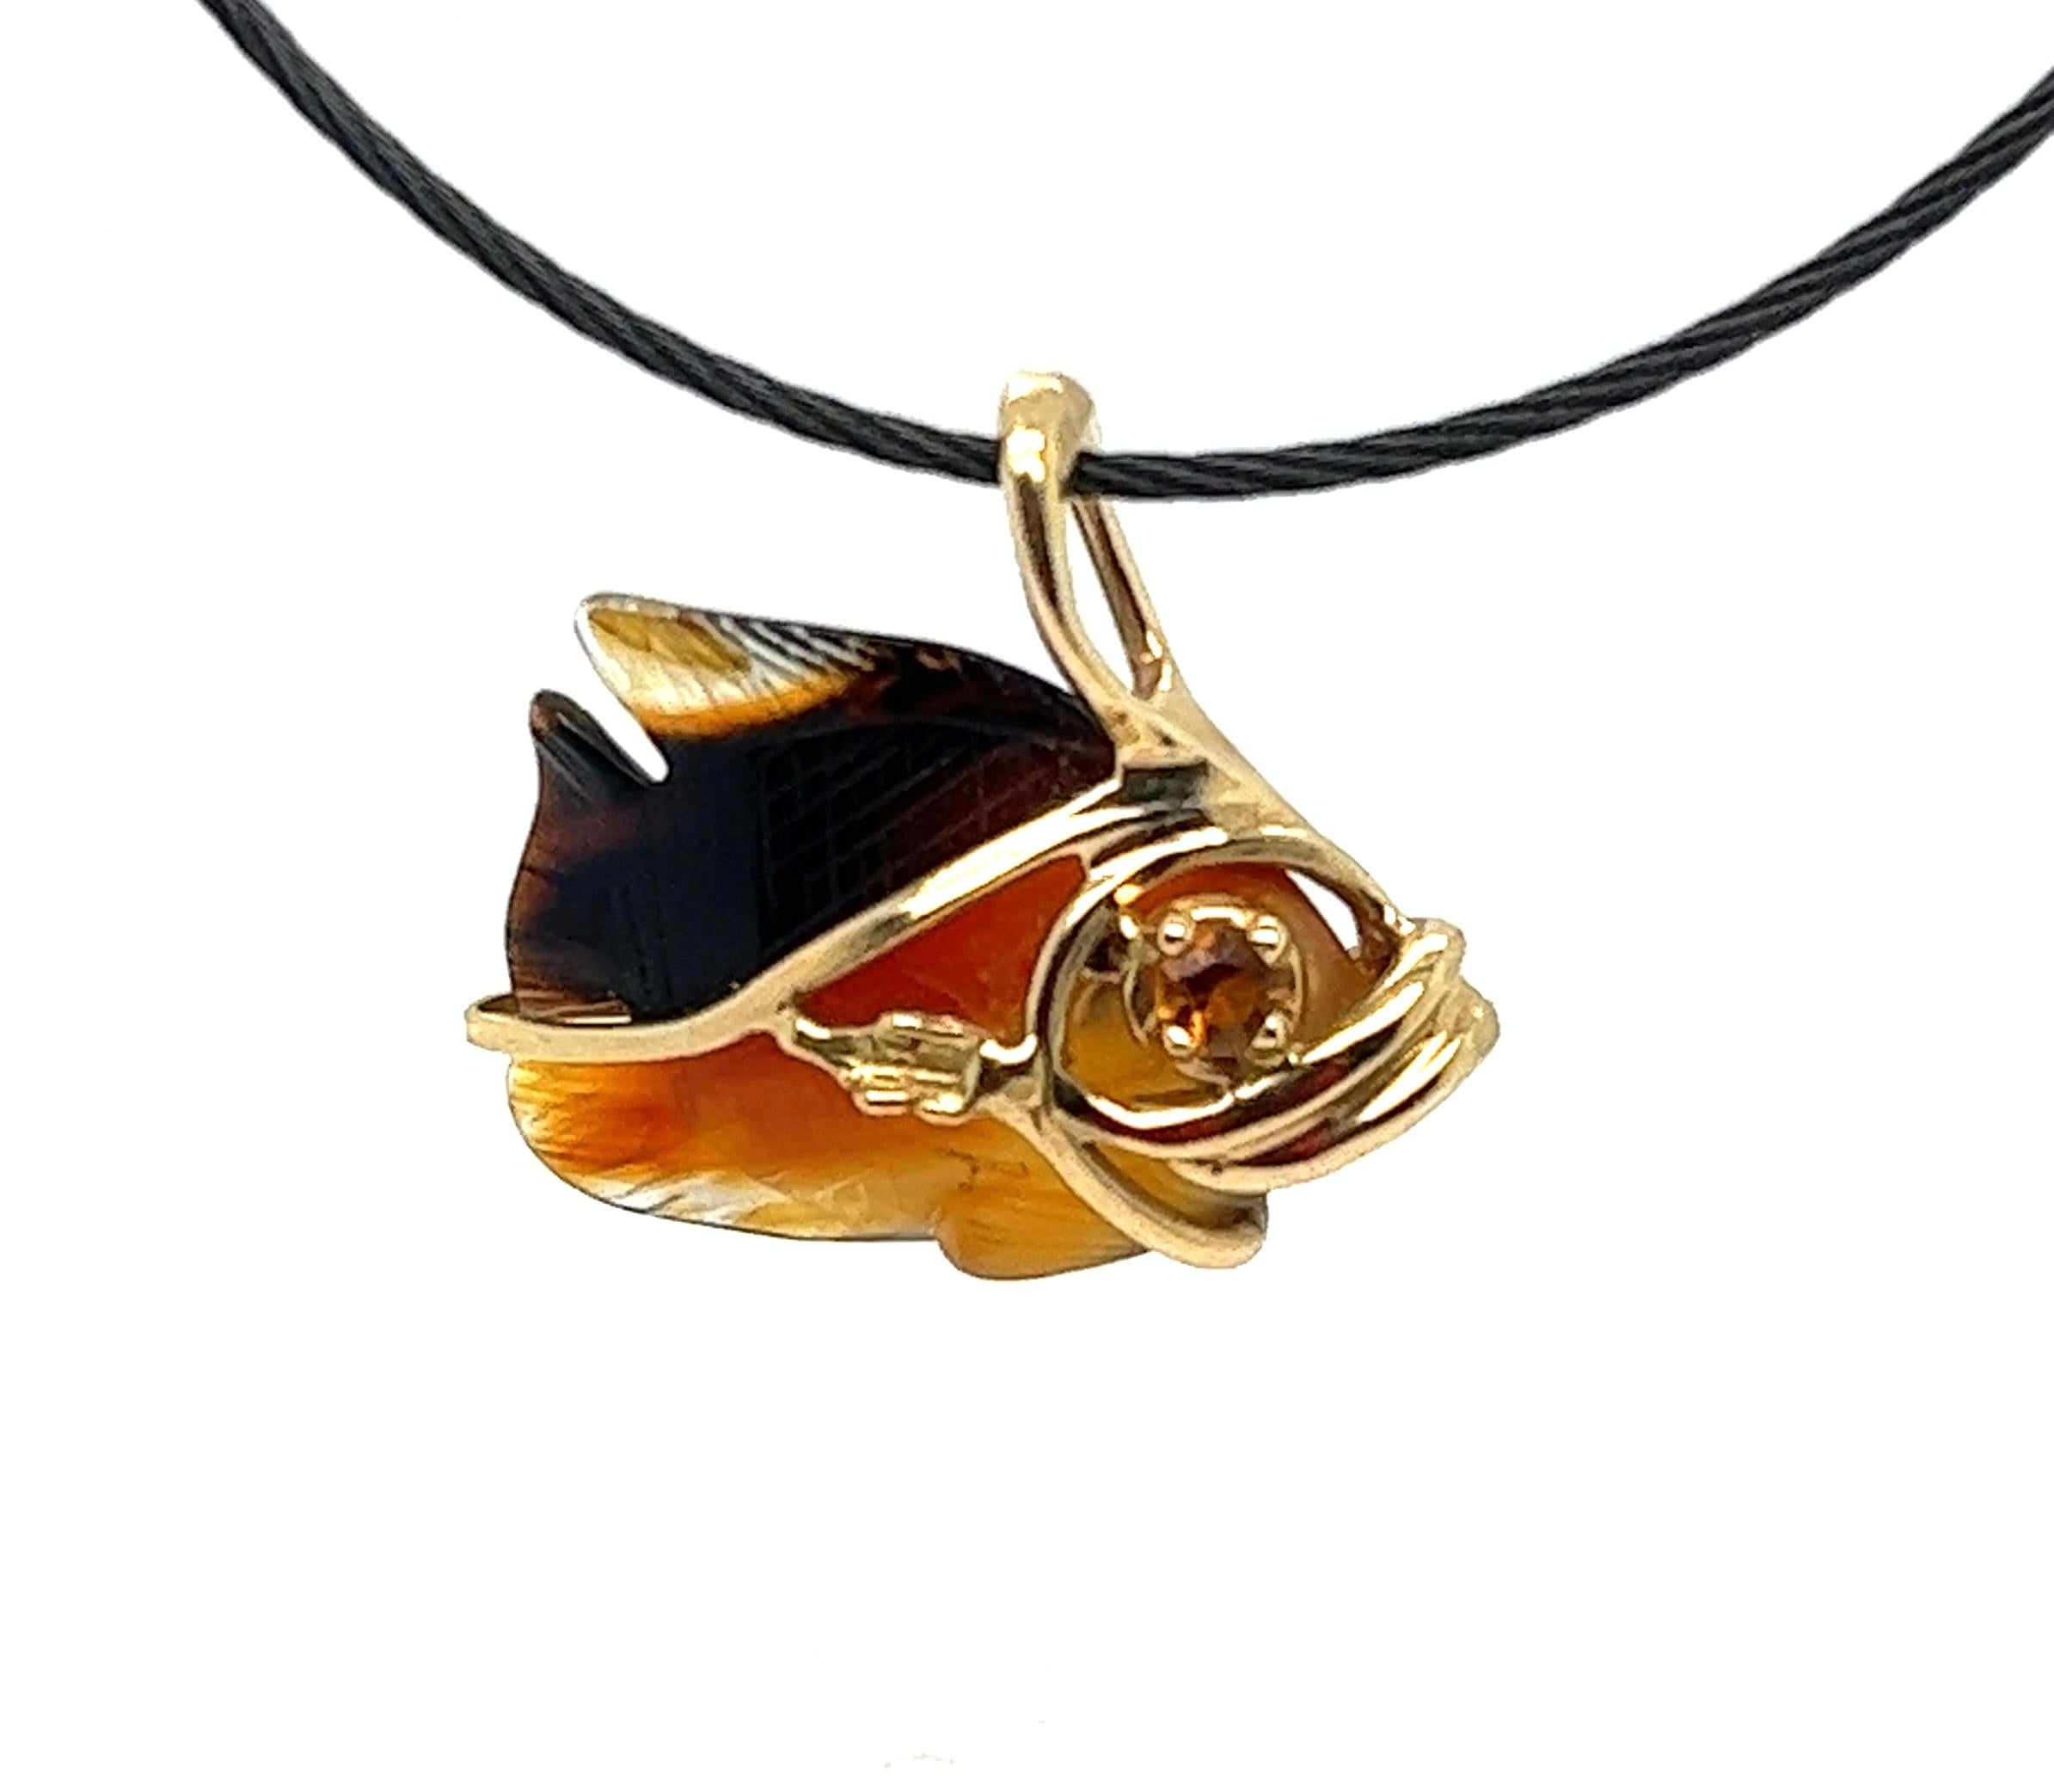 Offered here is a one of a kind sculpted angelfish in 14 karat yellow gold frame with citrine eye and smokey quarts body.
Pendant is hanging on a black marine cord with 14 kt yellow gold ends and lobster claw.
Pendant is 25mm by 15mm high, bale not